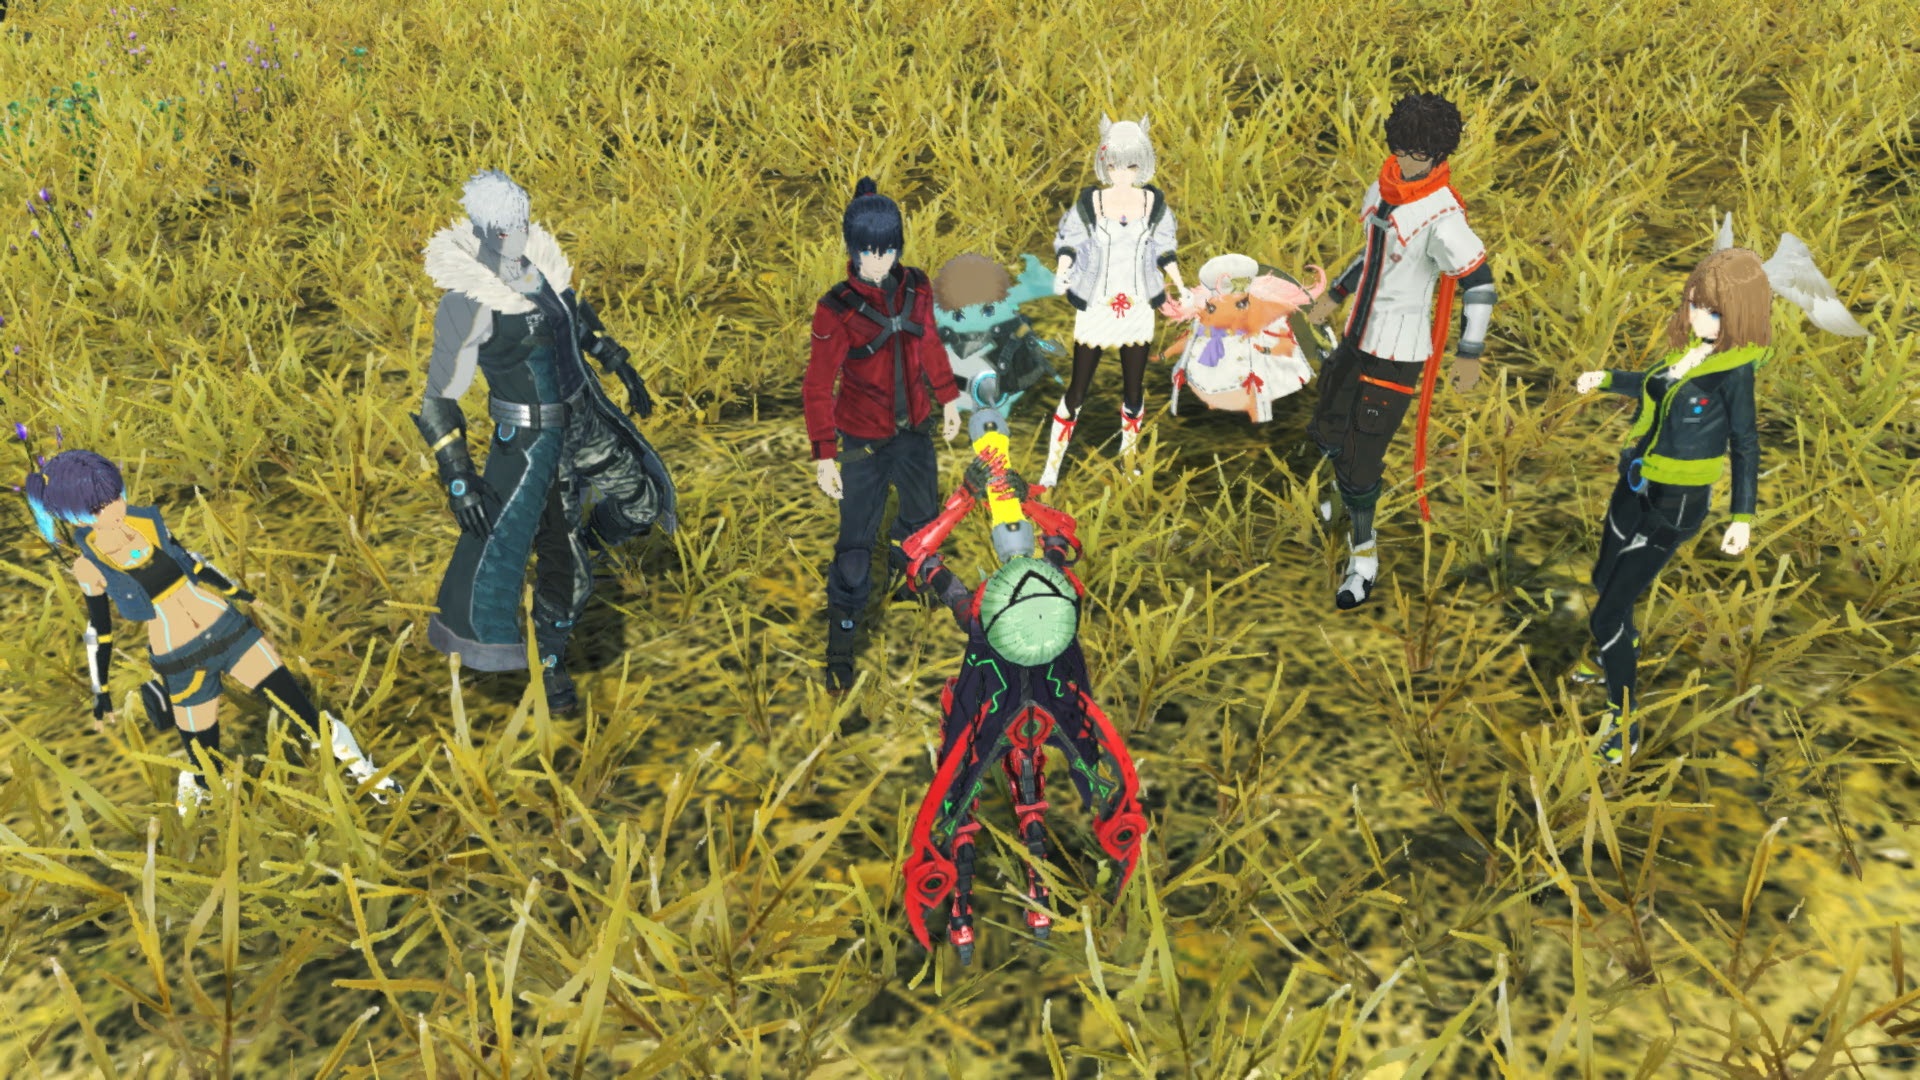 Xenoblade Chronicles 3 1.2.0 Update Introduces Support for New DLC and  More; Sneak Peak at Wave 3 DLC Released